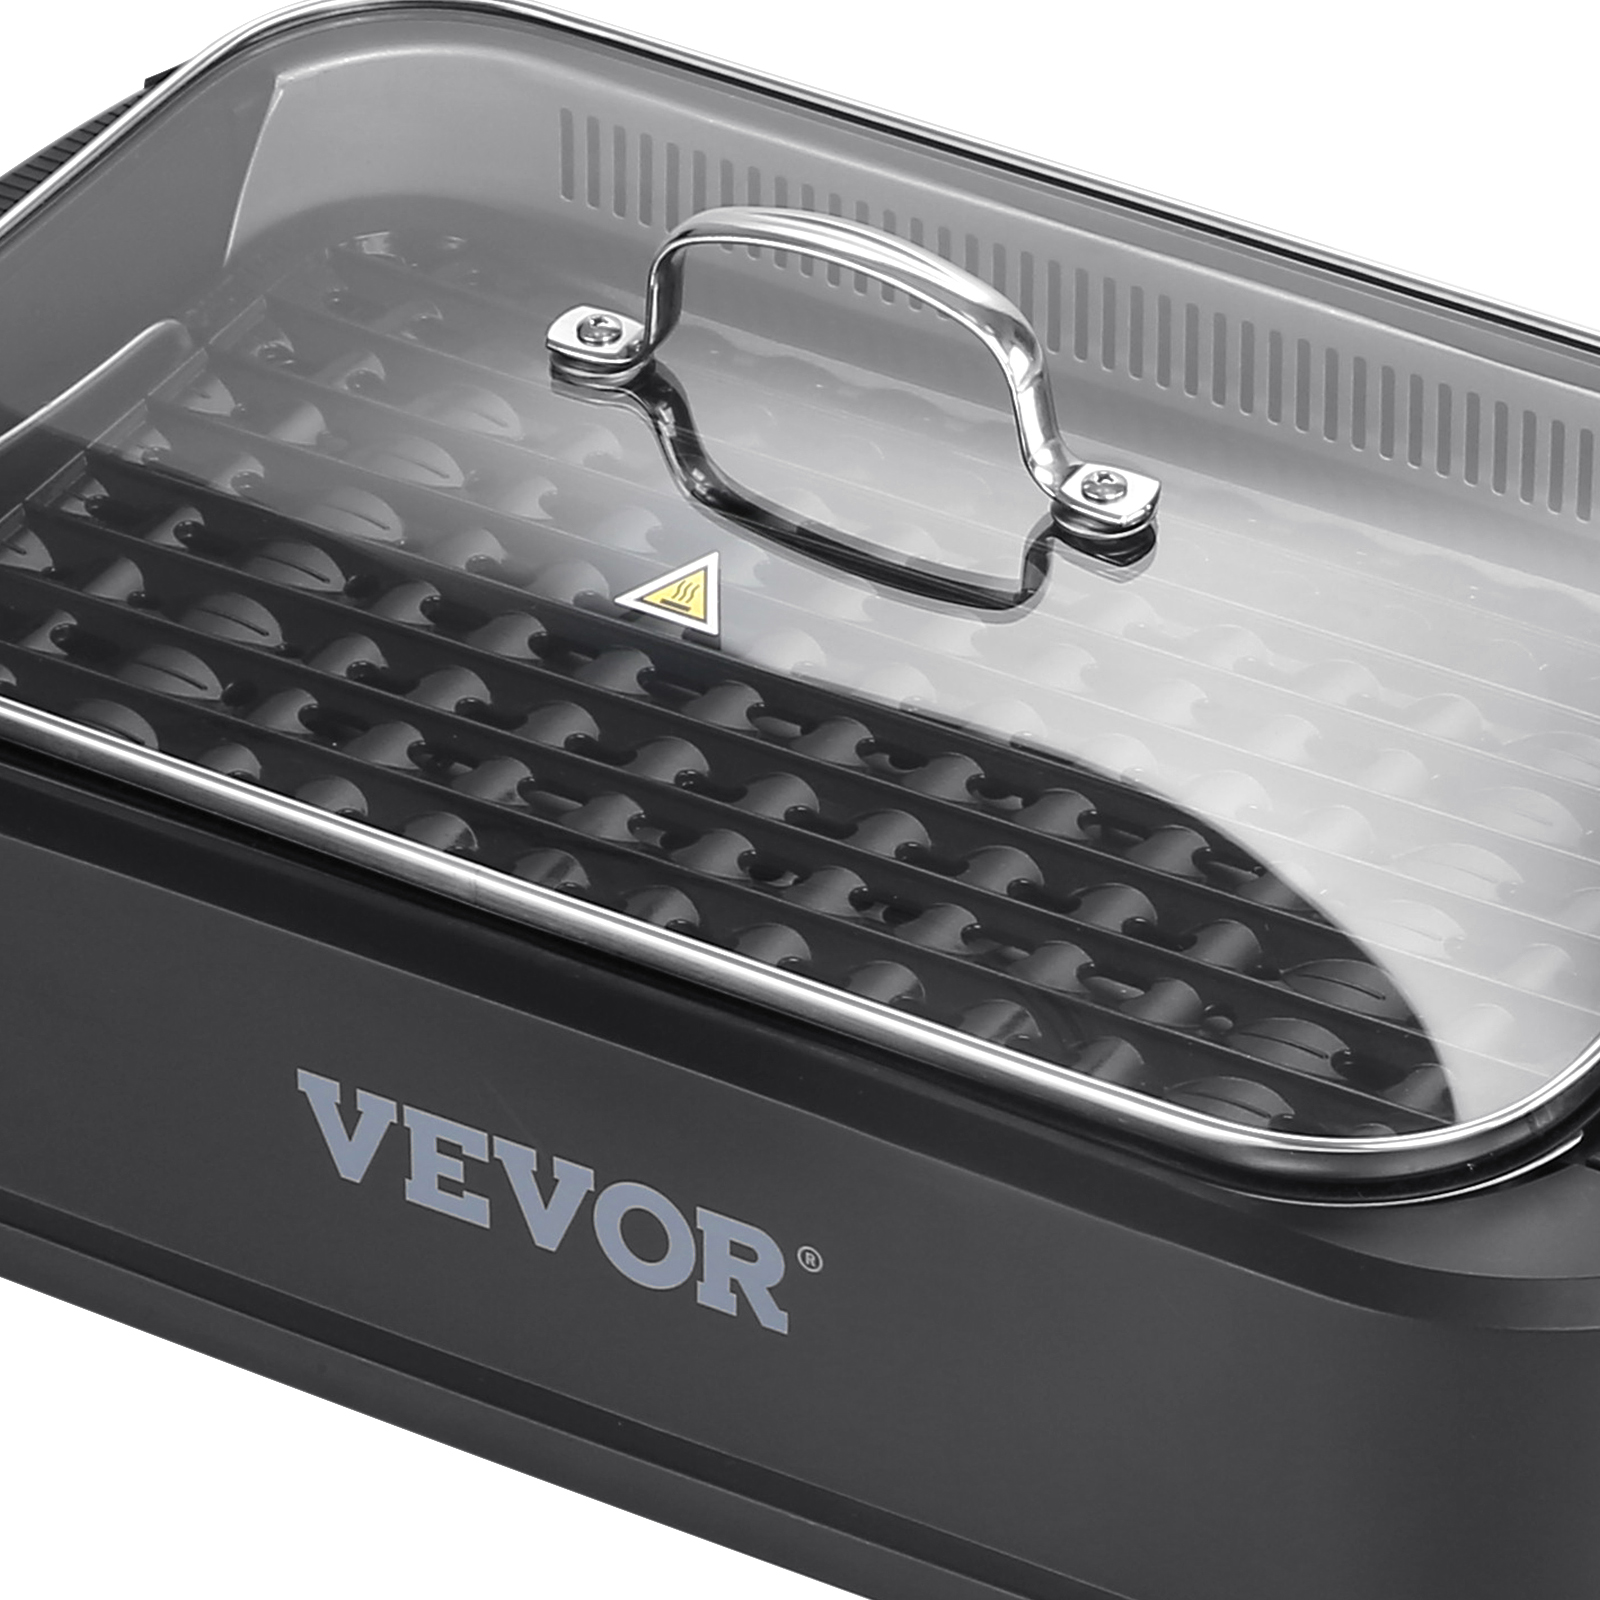 VEVOR Smokeless Electric Grills 110 sq. in. Electric BBQ Grill